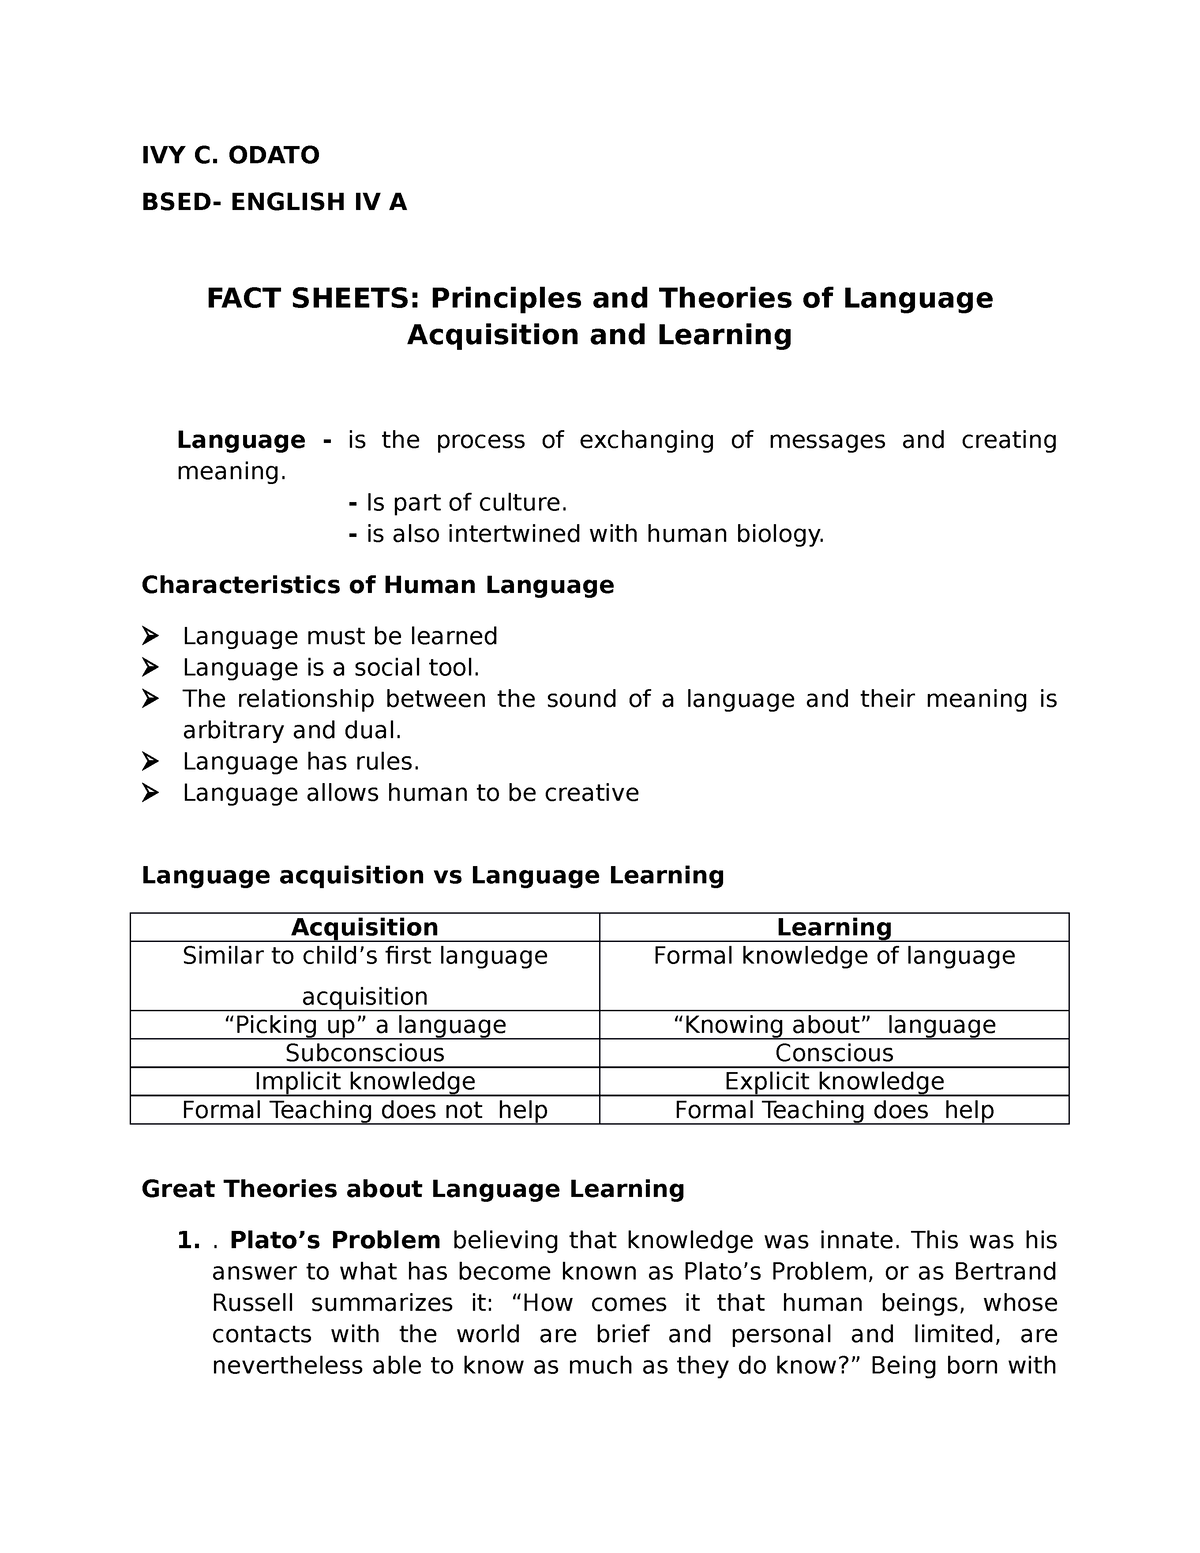 fact-sheet-in-english-spec-102-ivy-c-odato-bsed-english-iv-a-fact